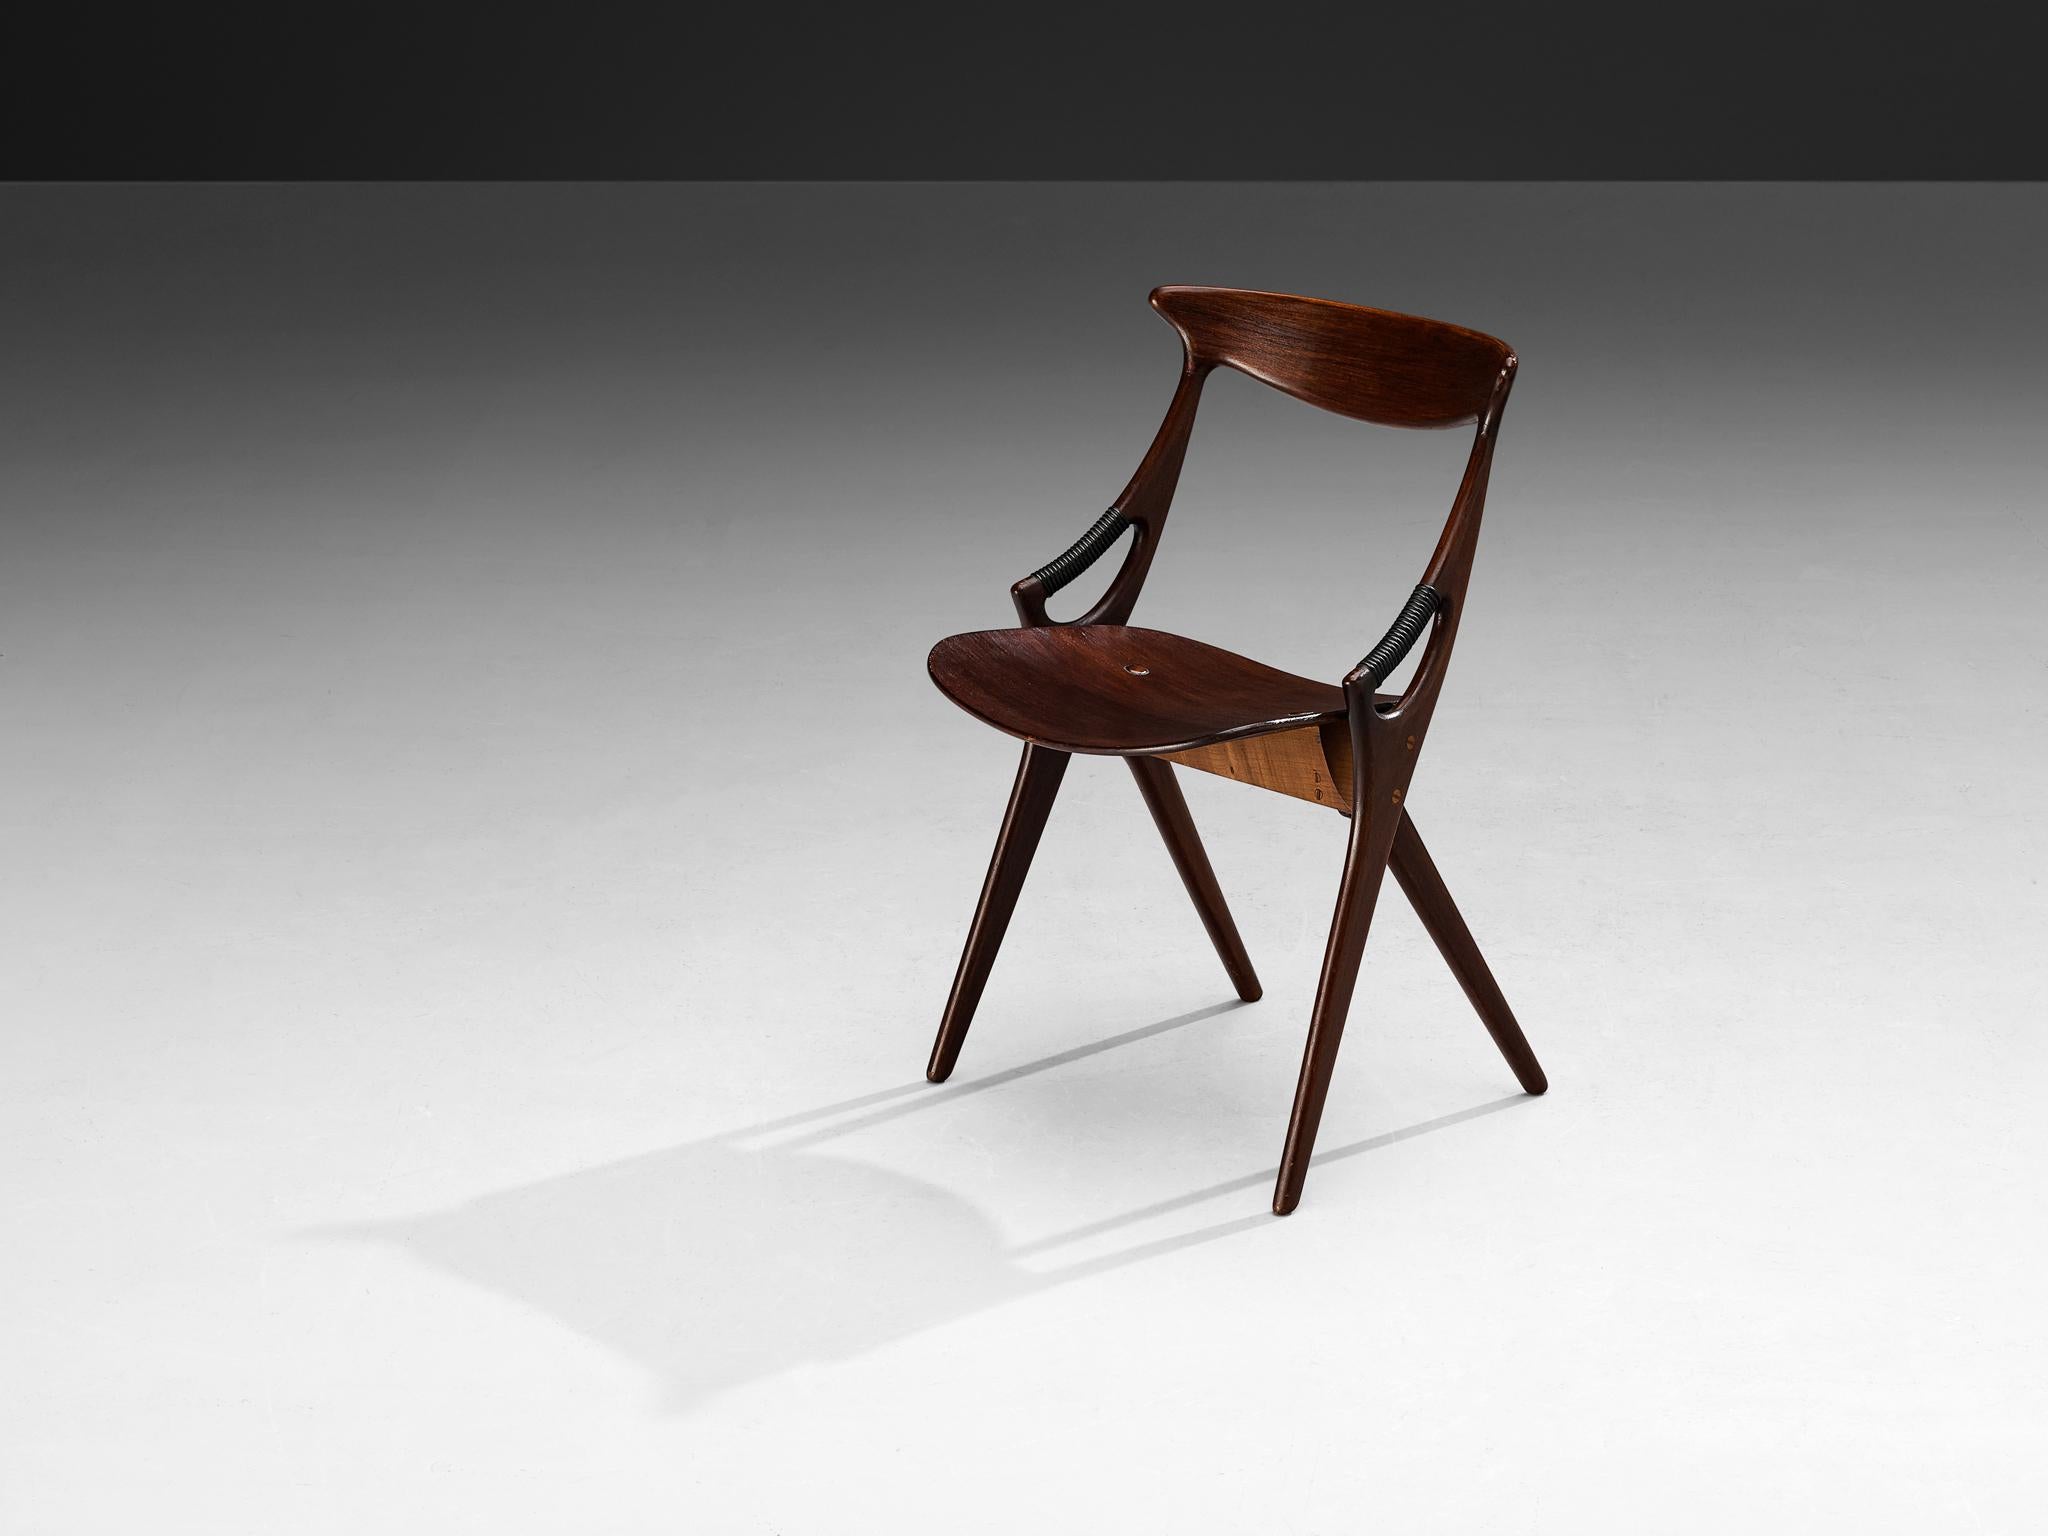 Arne Hovmand-Olsen for Mogens Kold Møbelfabrik, dining chair, model 71, mahogany, brass, Denmark, 1959 

This sculptural chair is designed by the Dane Arne Hovmand-Olsen for Mogens Kold Møbelfabrik. The chair is organic in its shape as can be seen